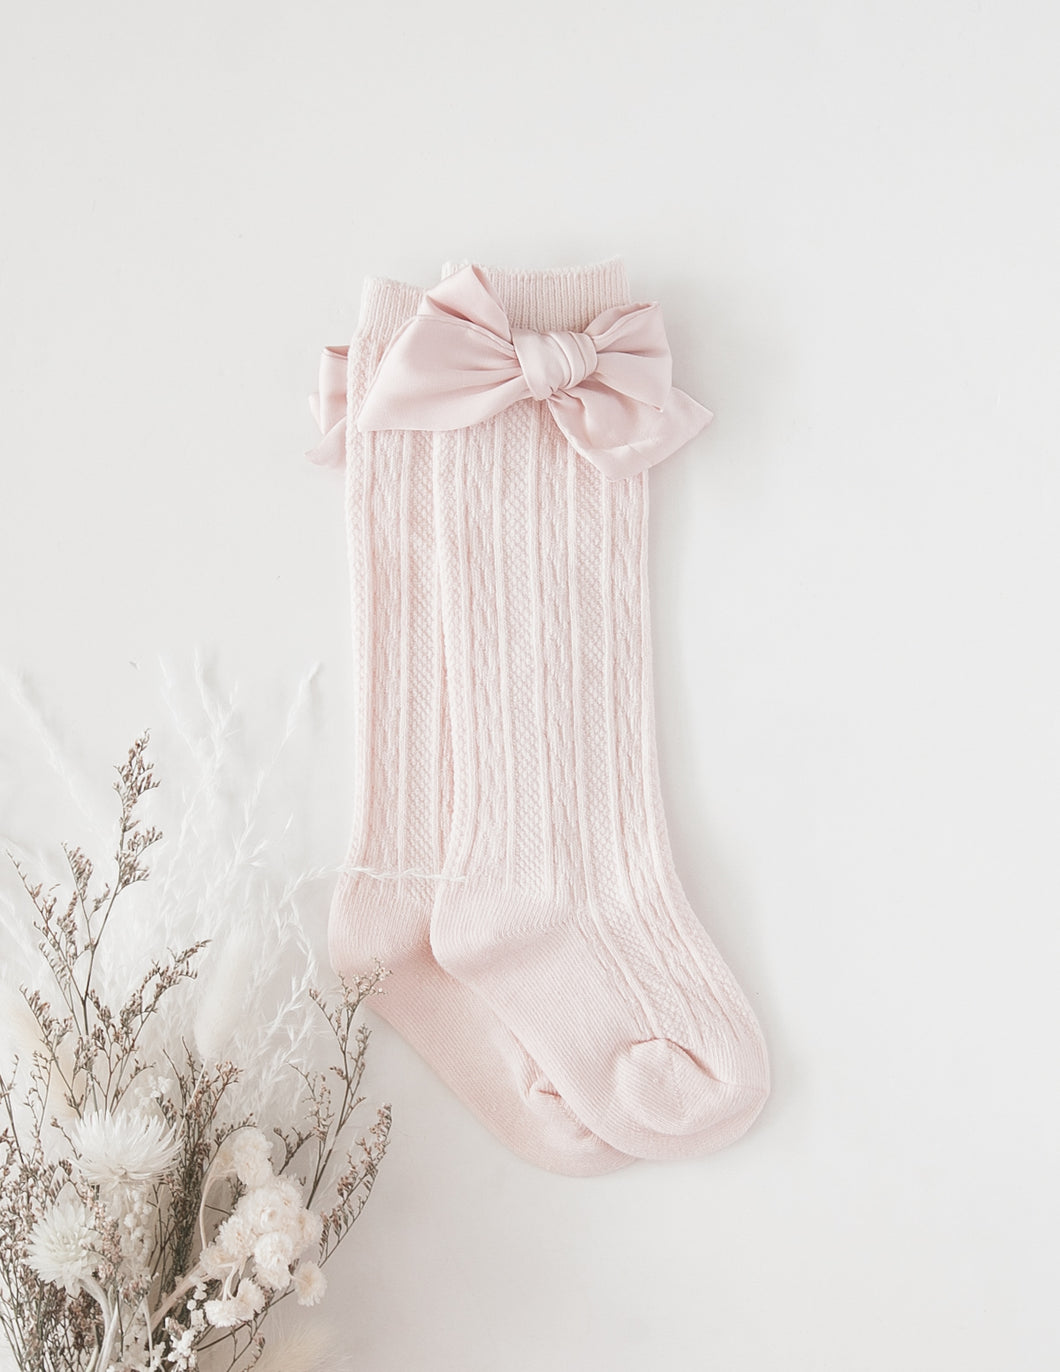 Chloe Luxe Cable Knit Socks With Bows - Marshmallow